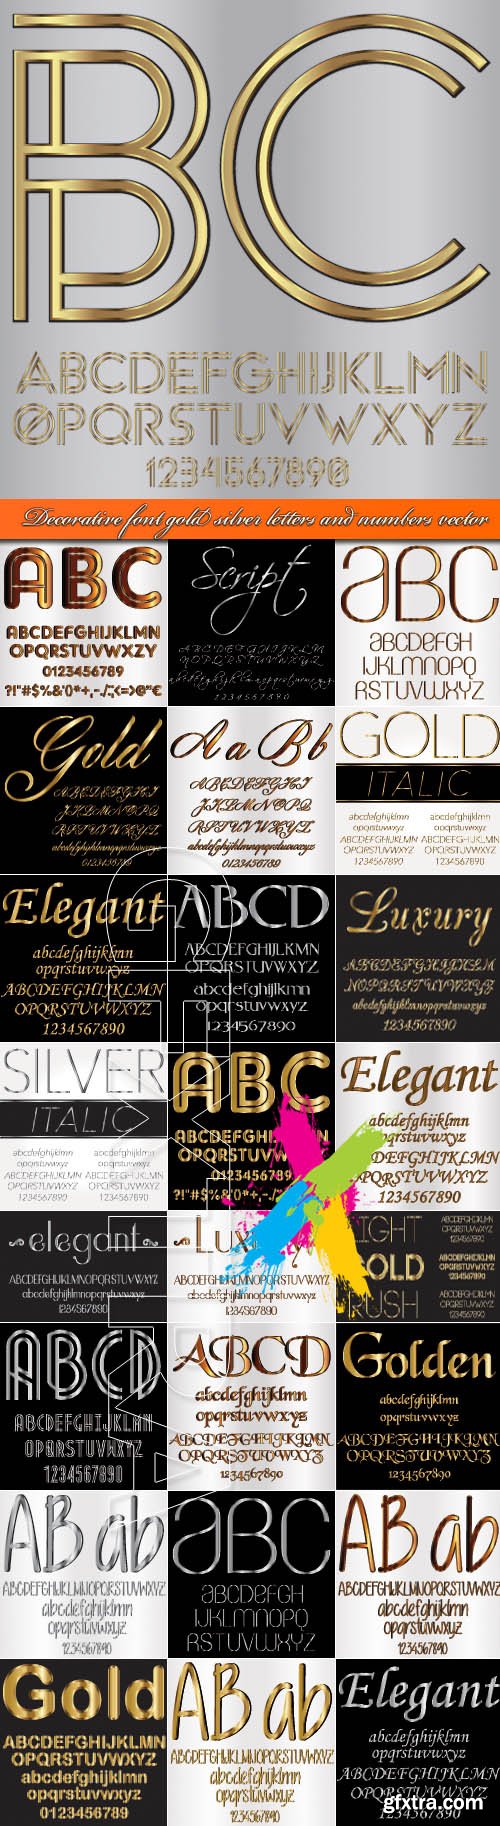 Decorative font gold silver letters and numbers vector